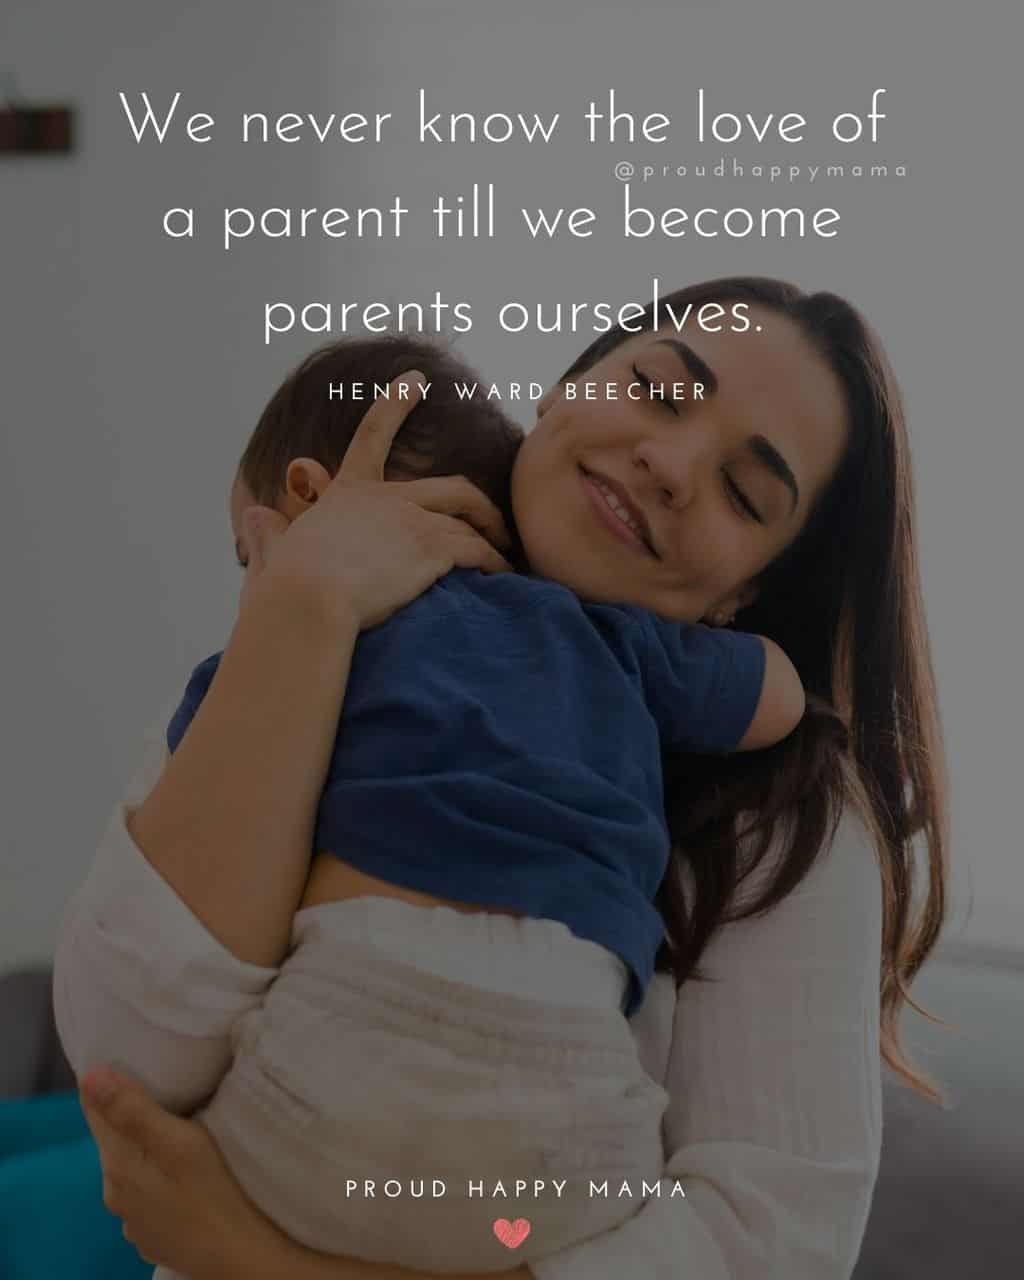 Parenting Quotes - We never know the love of a parent till we become parents ourselves.’ – Henry Ward BeecherParenting Quotes - We never know the love of a parent till we become parents ourselves.’ – Henry Ward Beecher